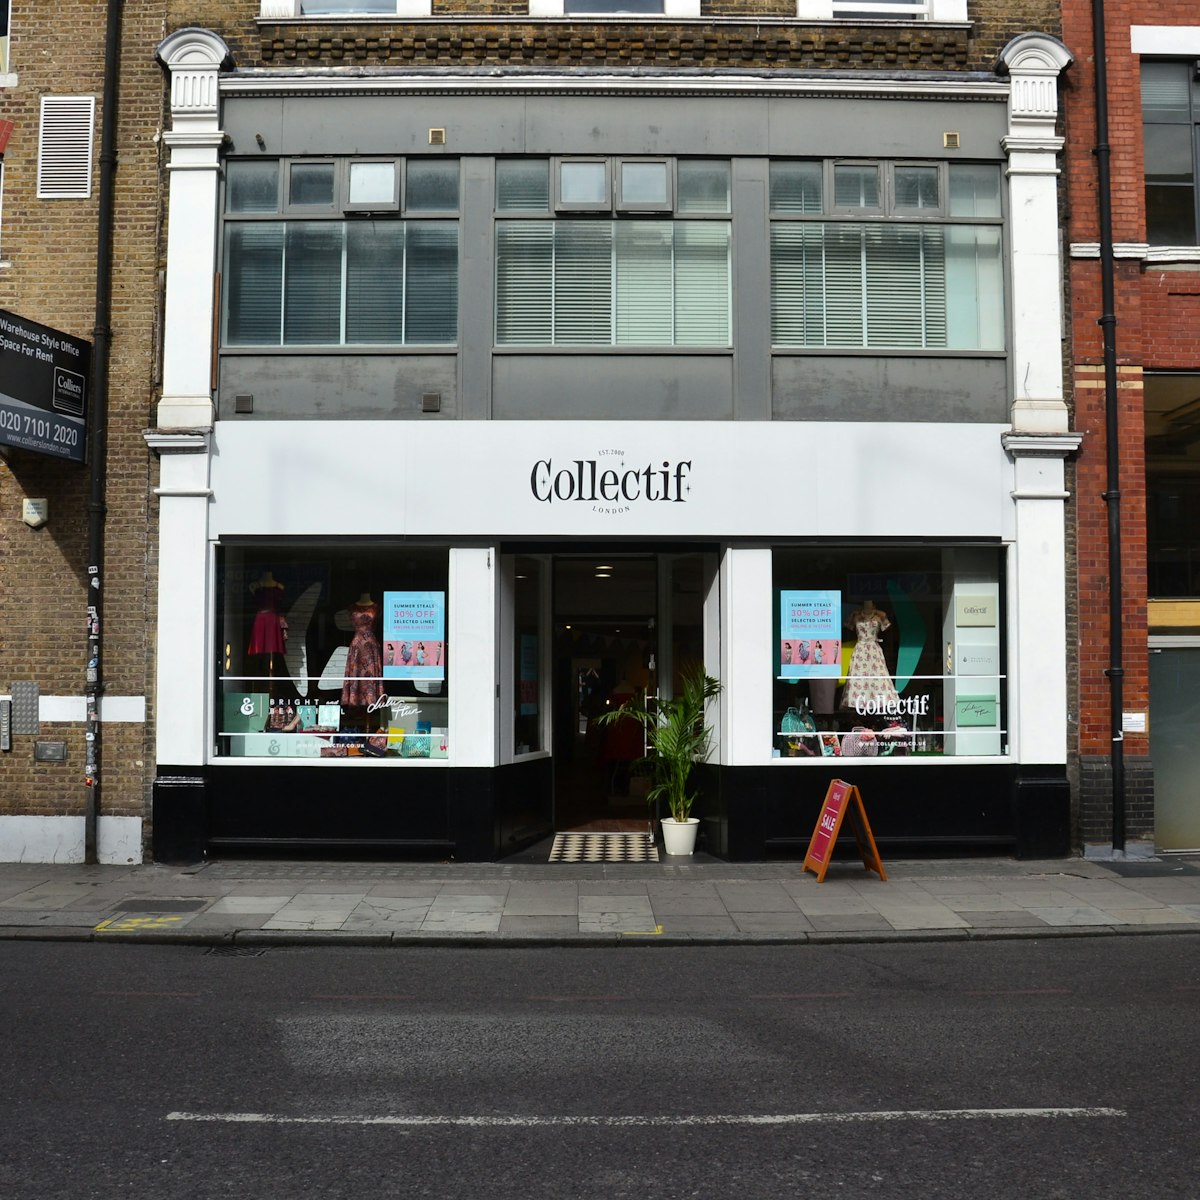 The exterior of Cocktail Trading Co, a cocktail bar in Clerkenwell